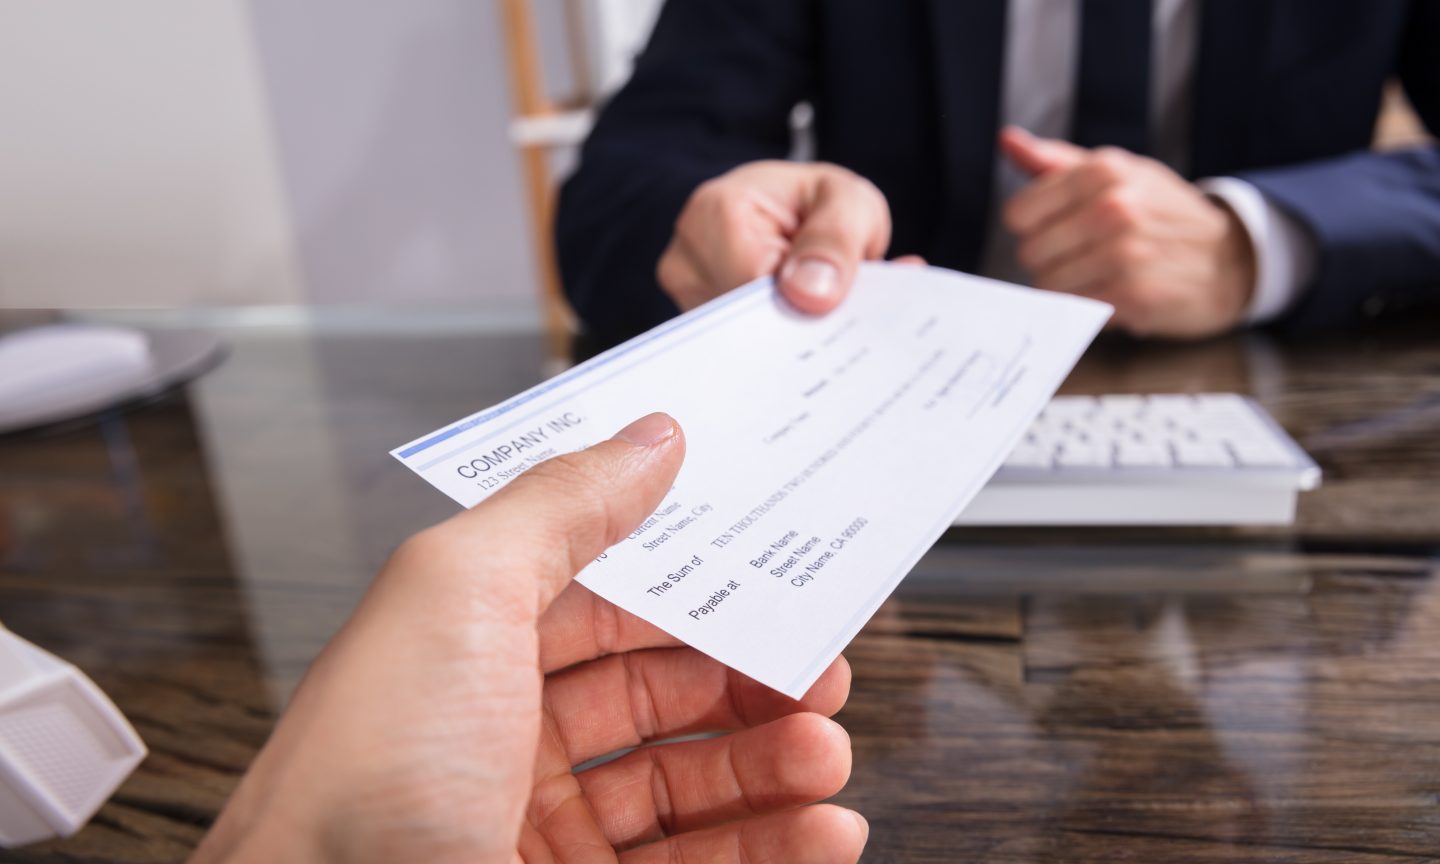 What Is a Cashier’s Check? Definition, Cost, Use and How to Buy One - NerdWallet